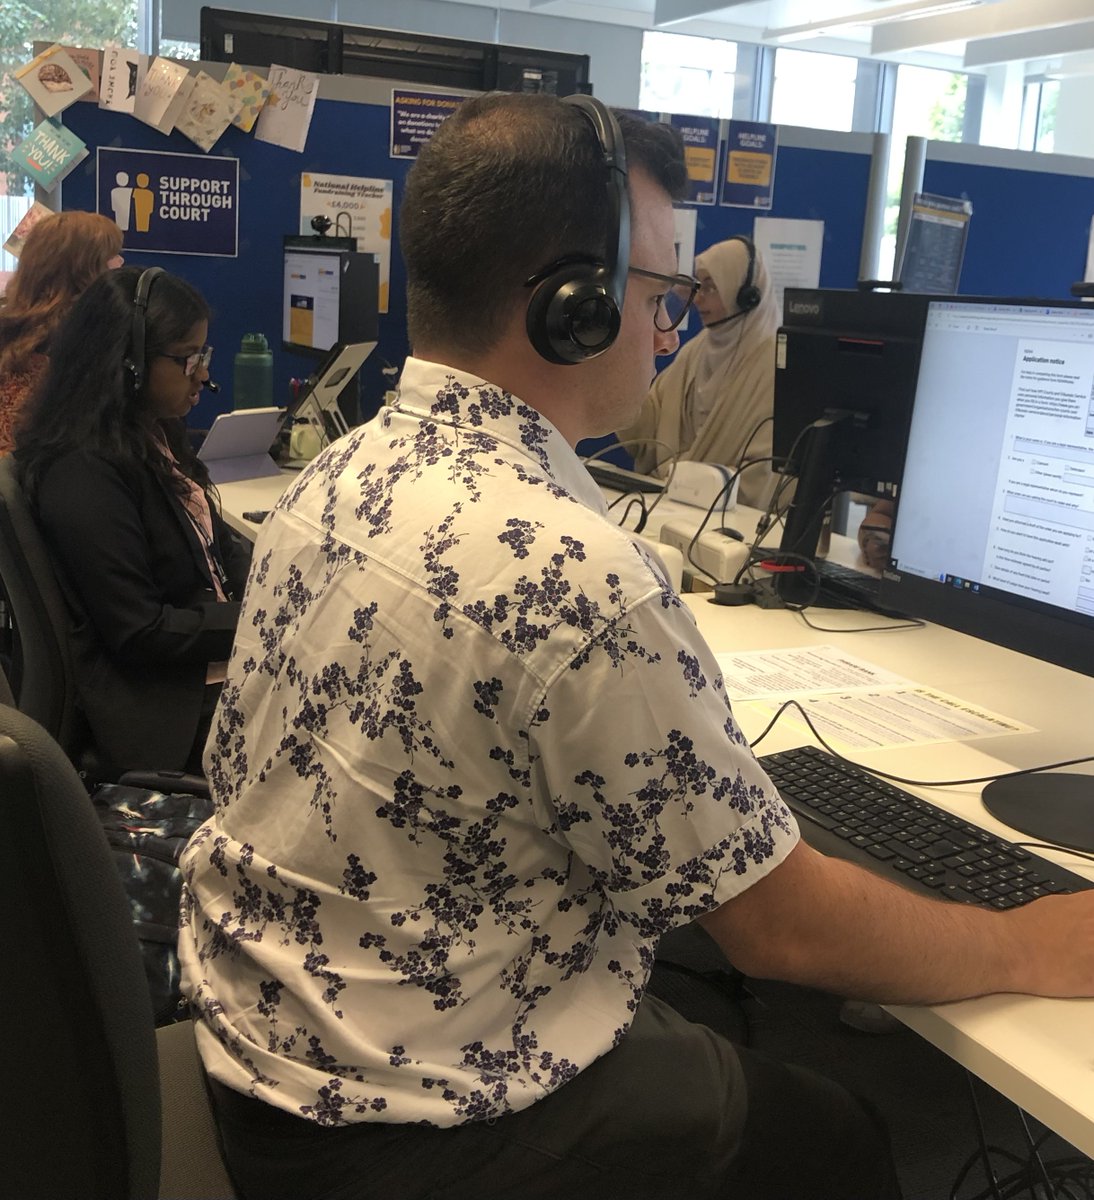 Today we have a film crew at our National Helpline to see the service in action. Already today a team of 12 volunteers has received over 120 calls from people struggling with housing, child arrangement, divorce, and money claim problems, without legal support. #AccessToJustice